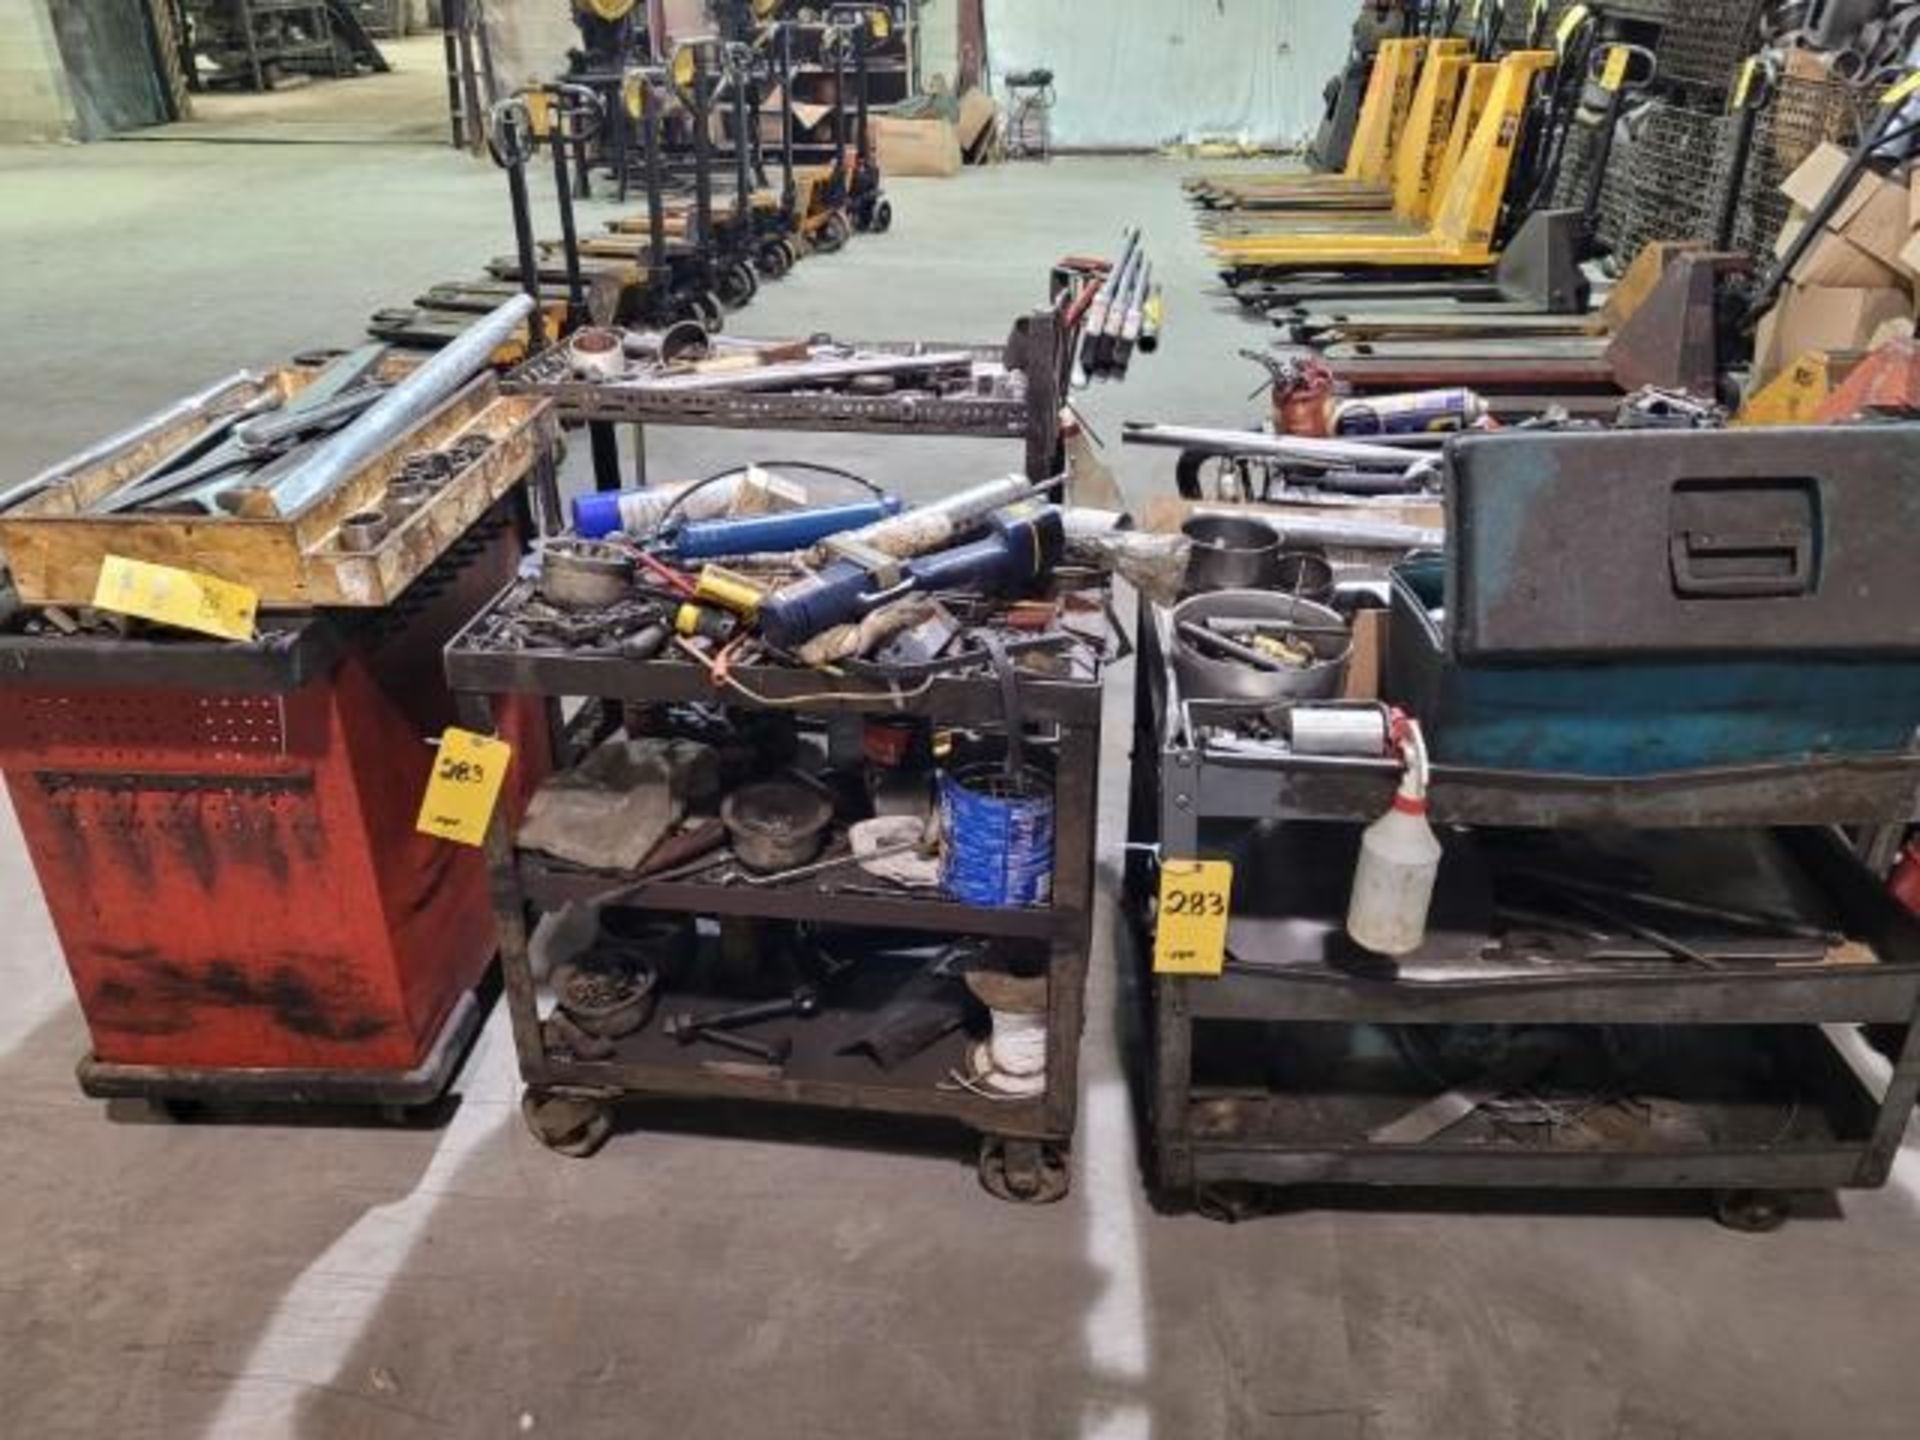 LOT: (6) Utility Carts w/ Hand Tools Consisting of: Sockets, Wrenches, Tool Boxes, Handles, Nuts, Bo